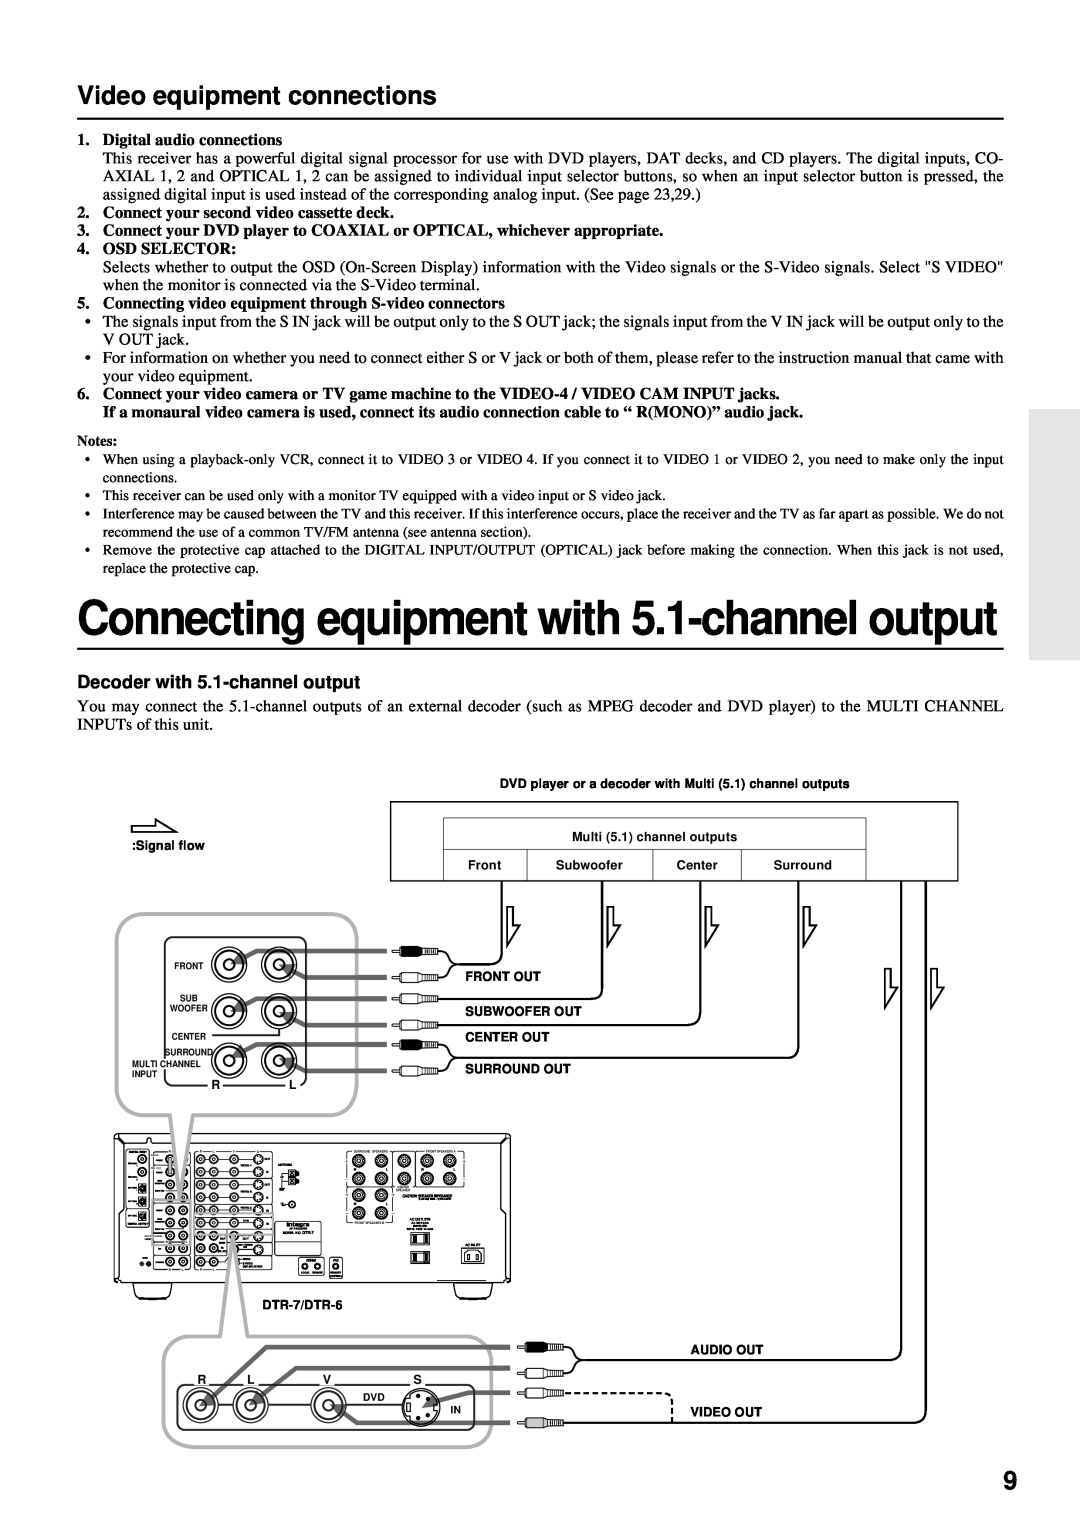 Integra DTR-7 Video equipment connections, Connecting equipment with 5.1-channeloutput, Decoder with 5.1-channeloutput 